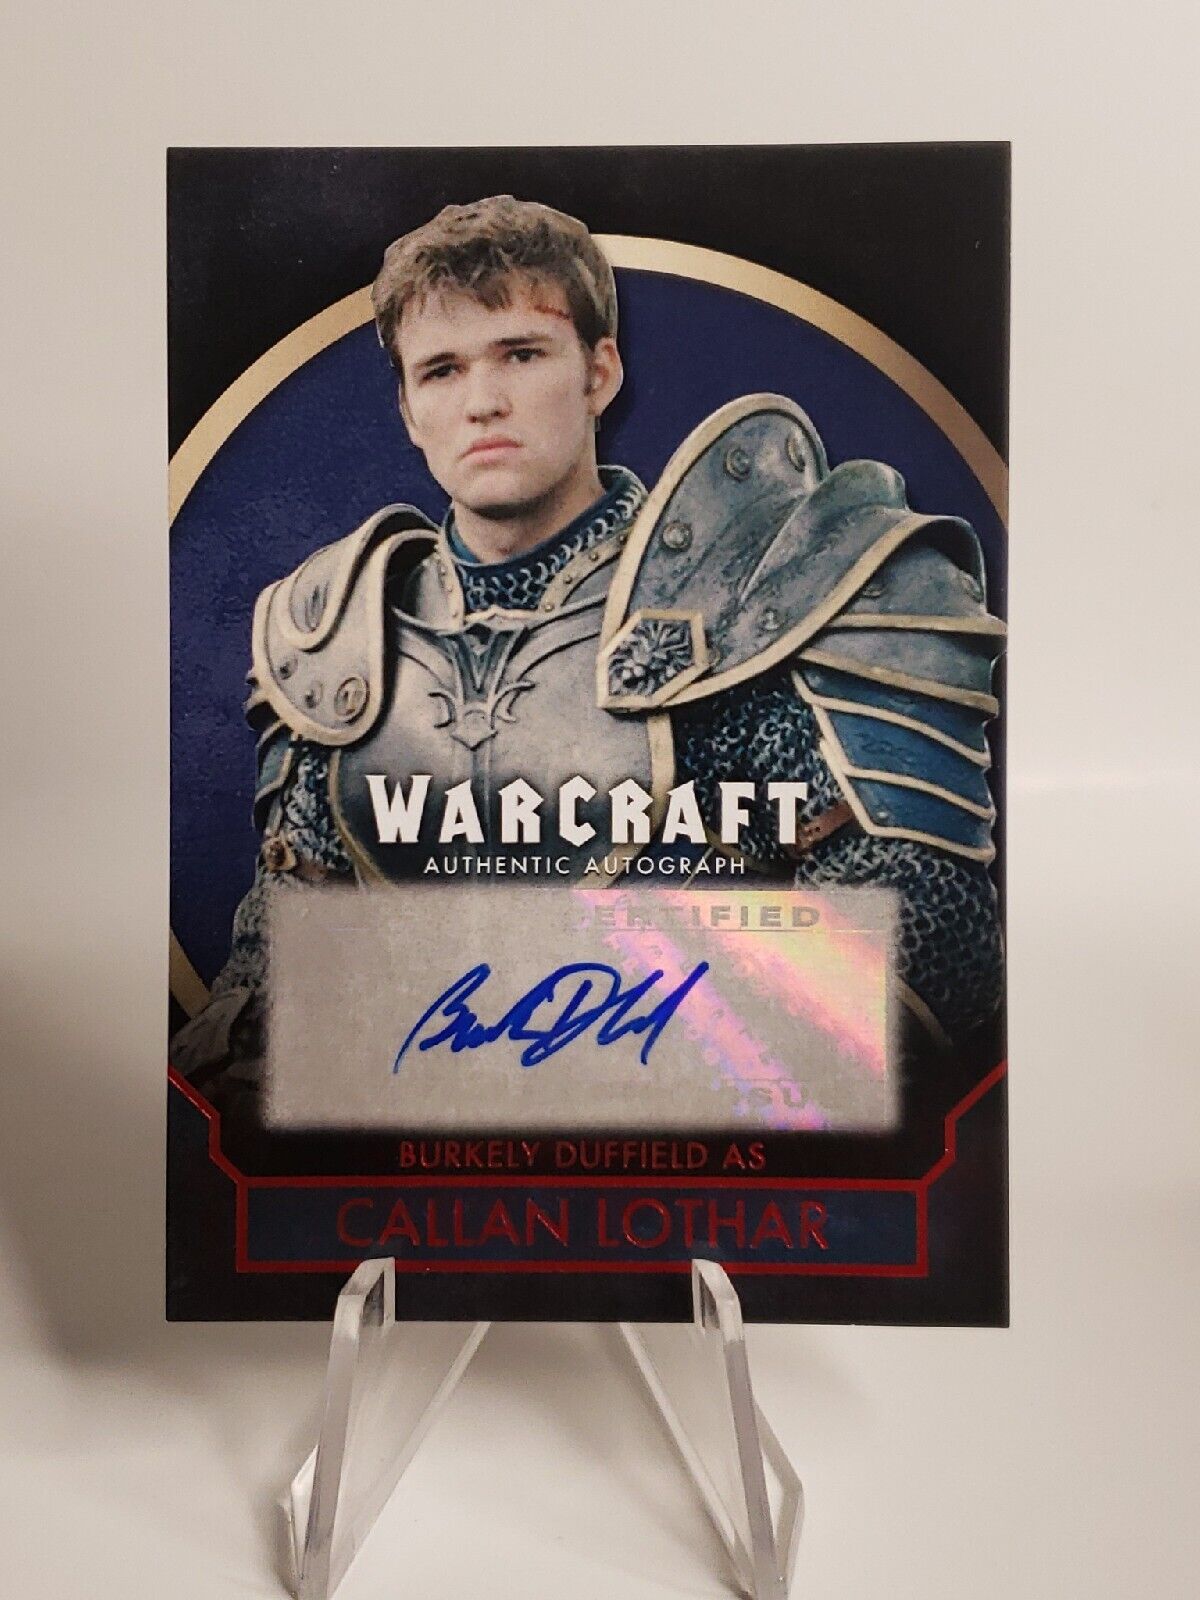 2016 Topps Warcraft Horde Red 16/25 Burkely Duffield as Callan Lothar Auto